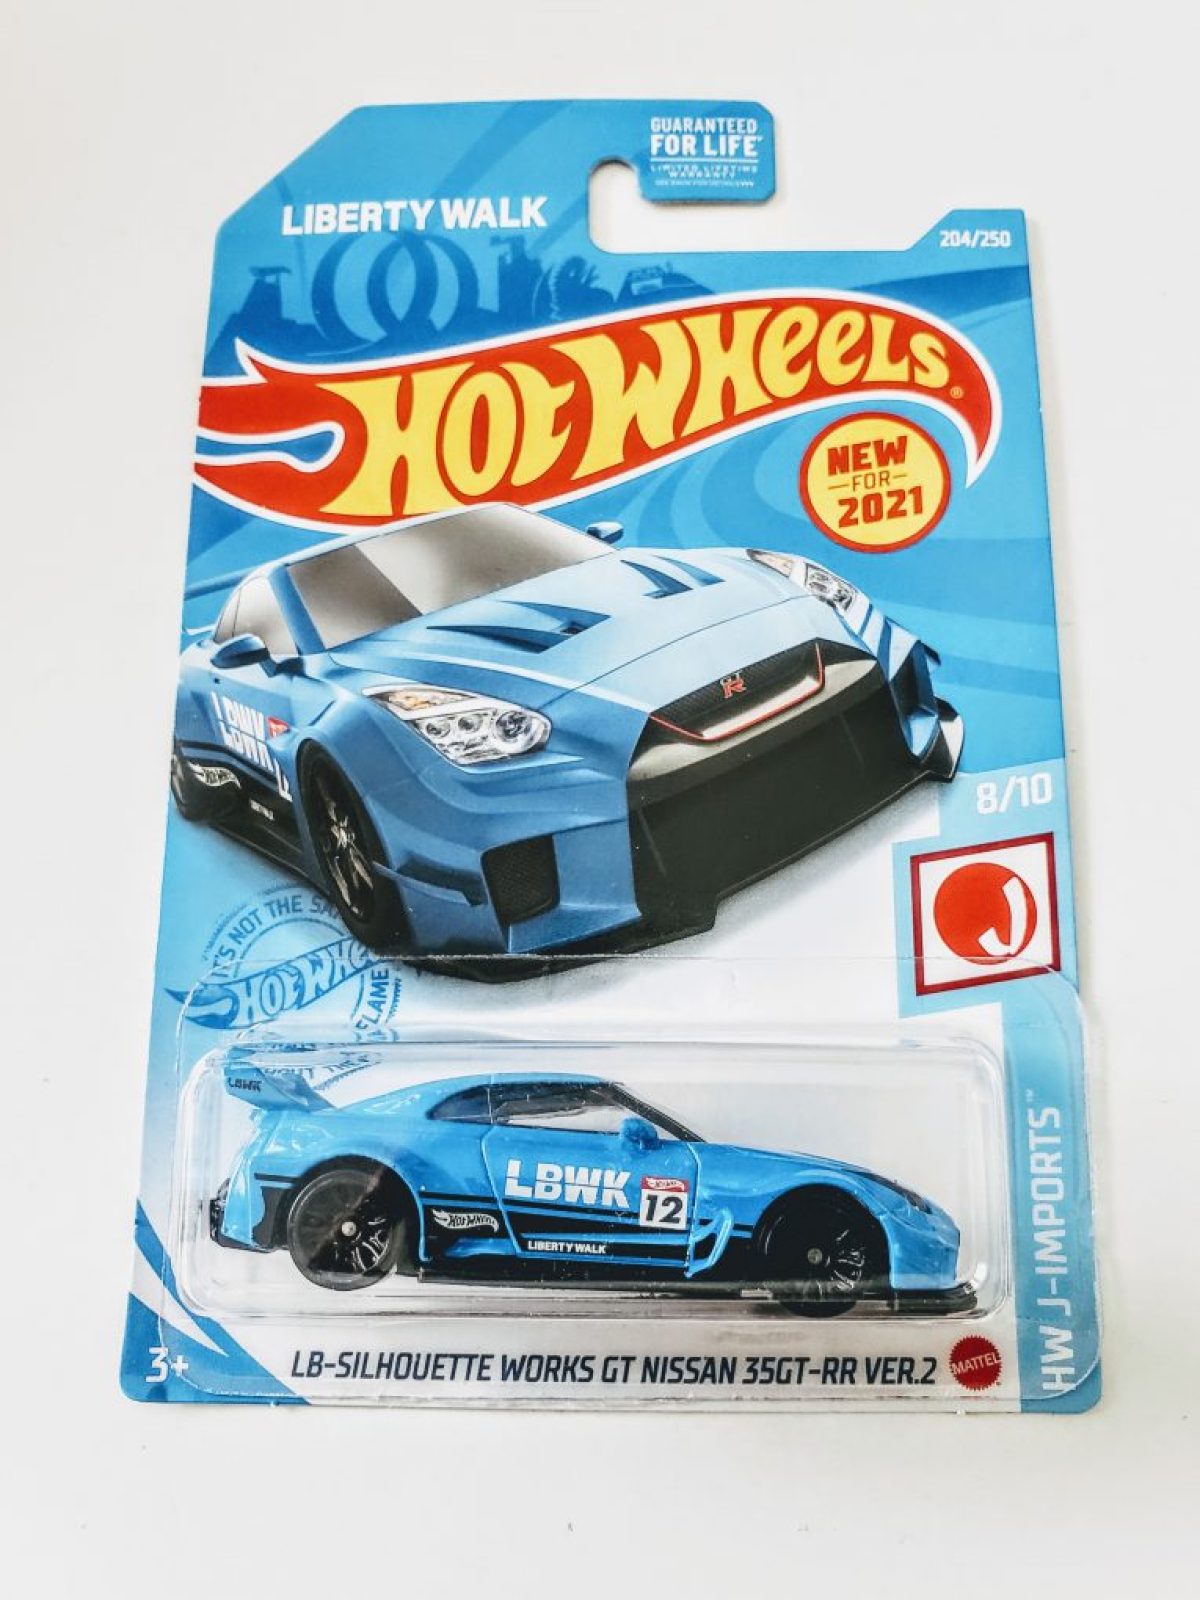 HOT WHEELS Pavement HW Skate Team Truck and Trailer Only Blue and Grey